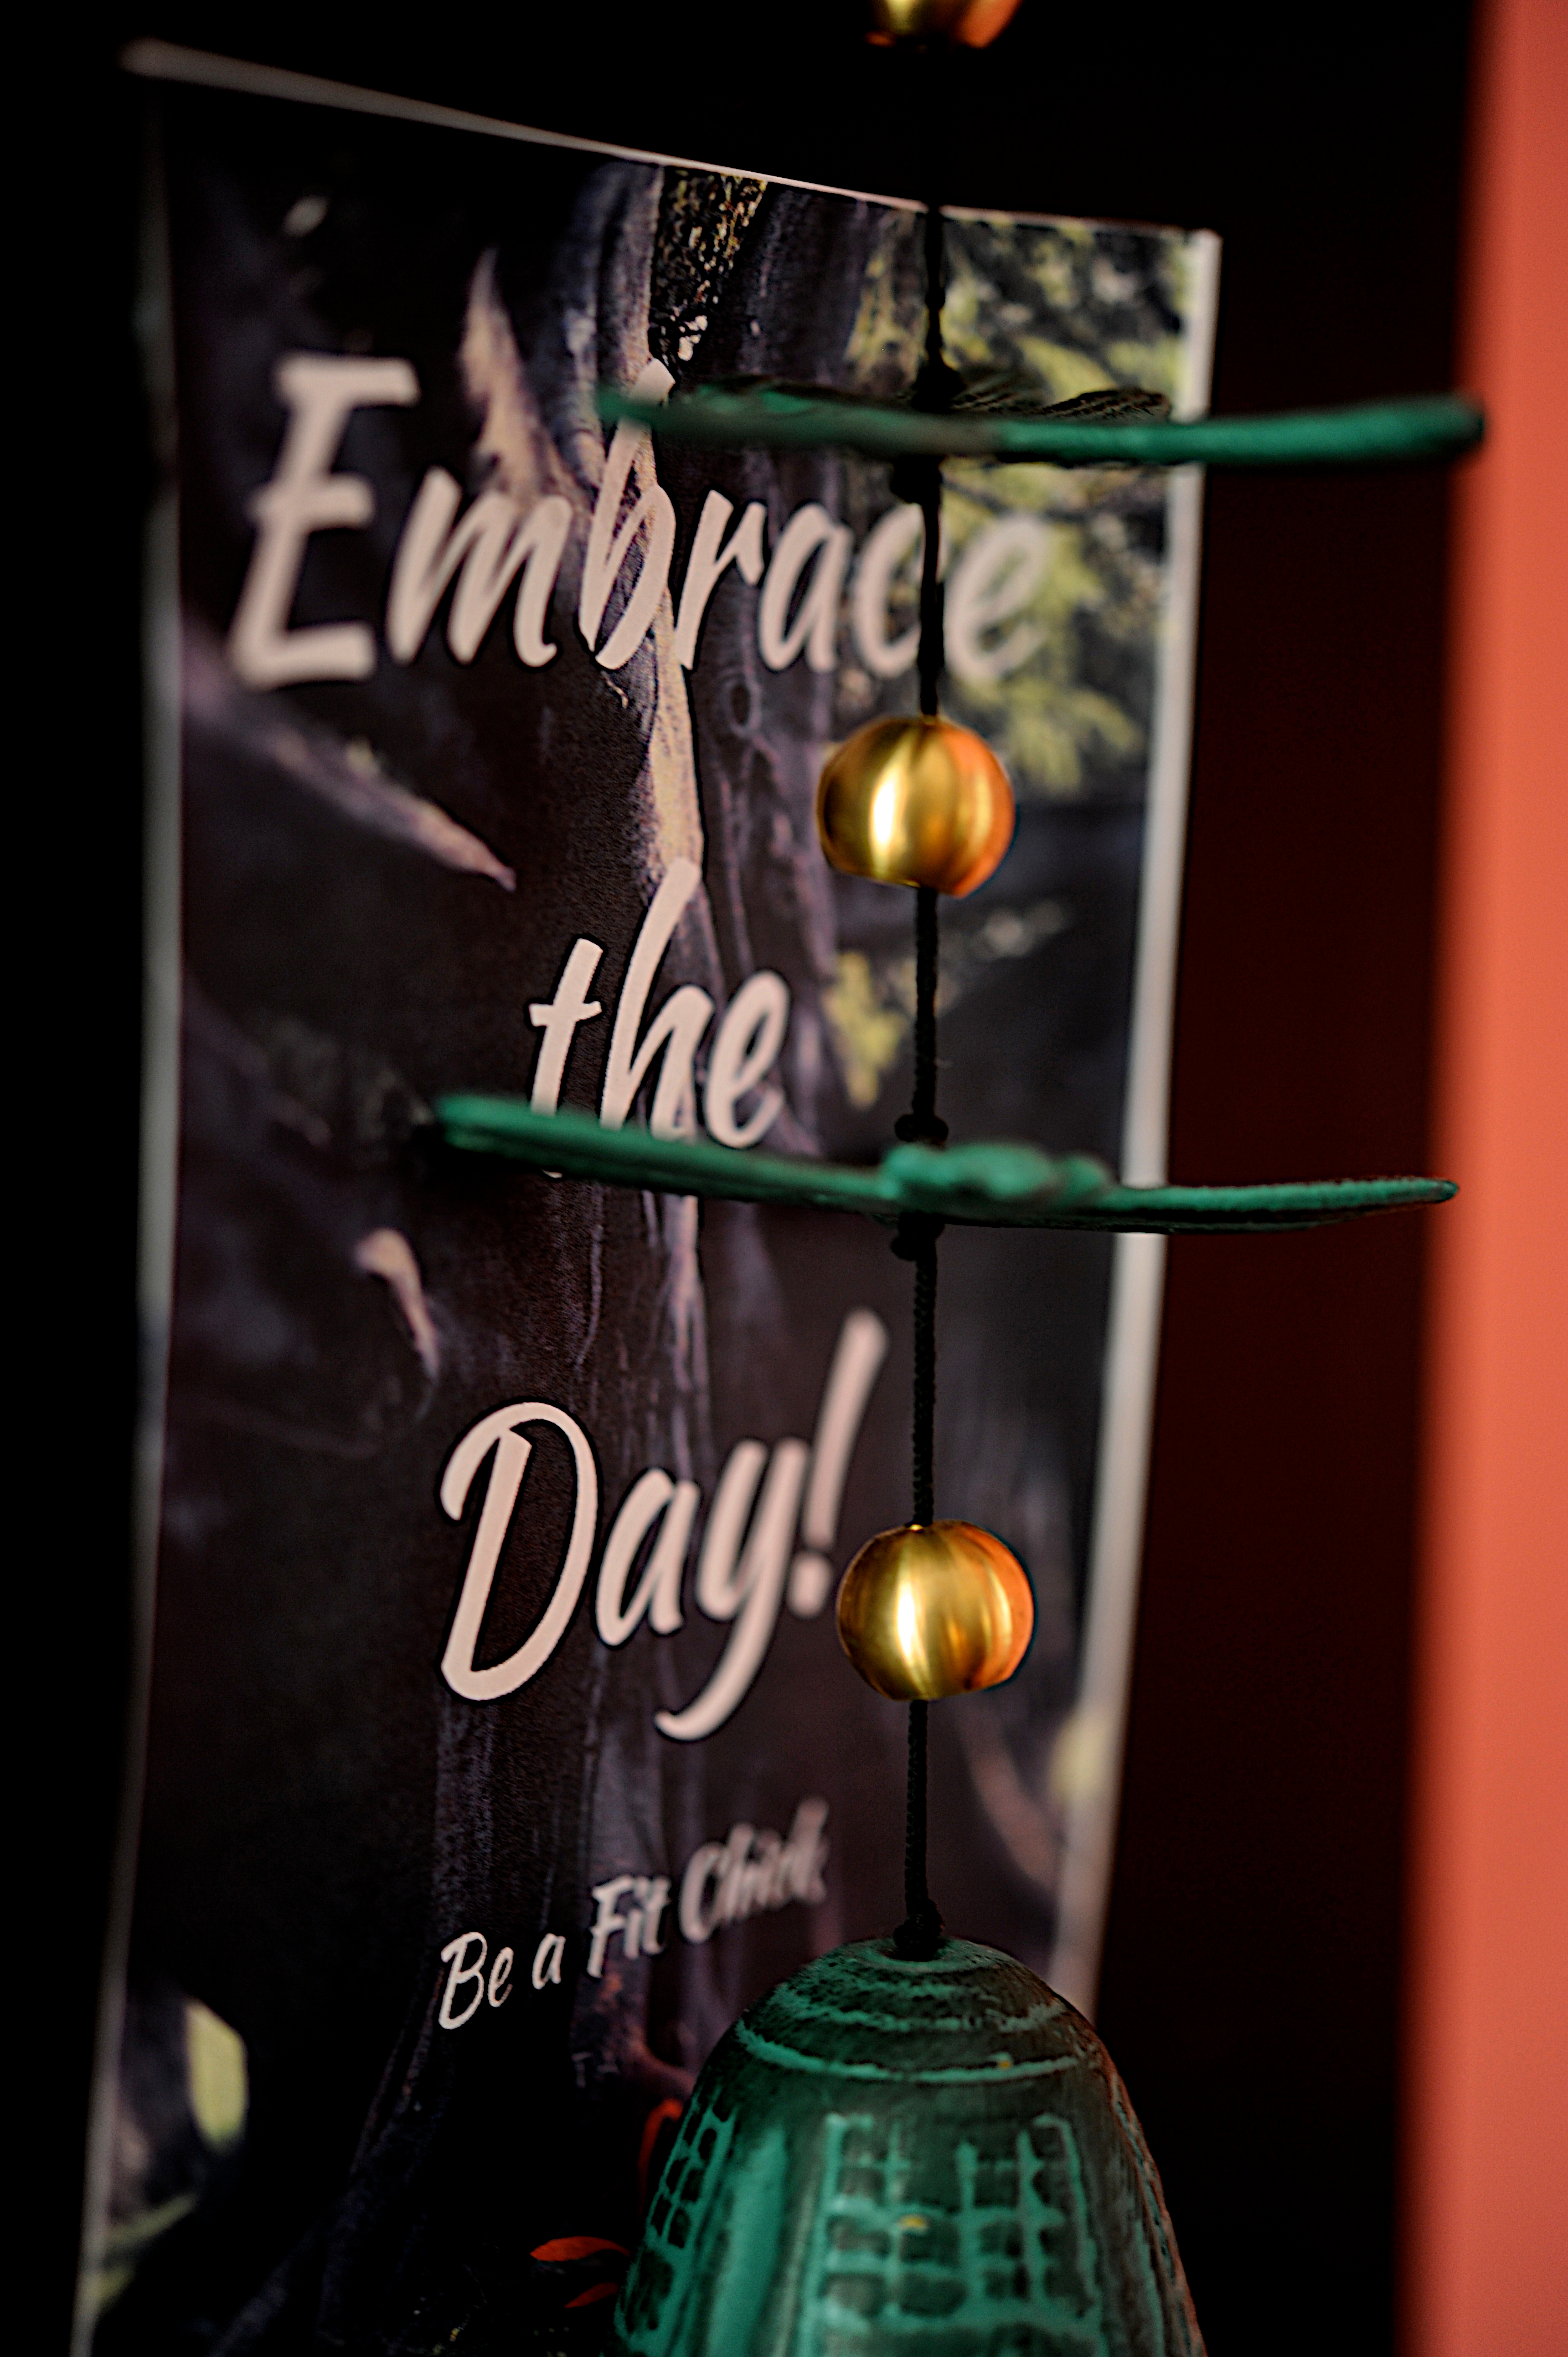 Lobby - Embrace the day2 - WB